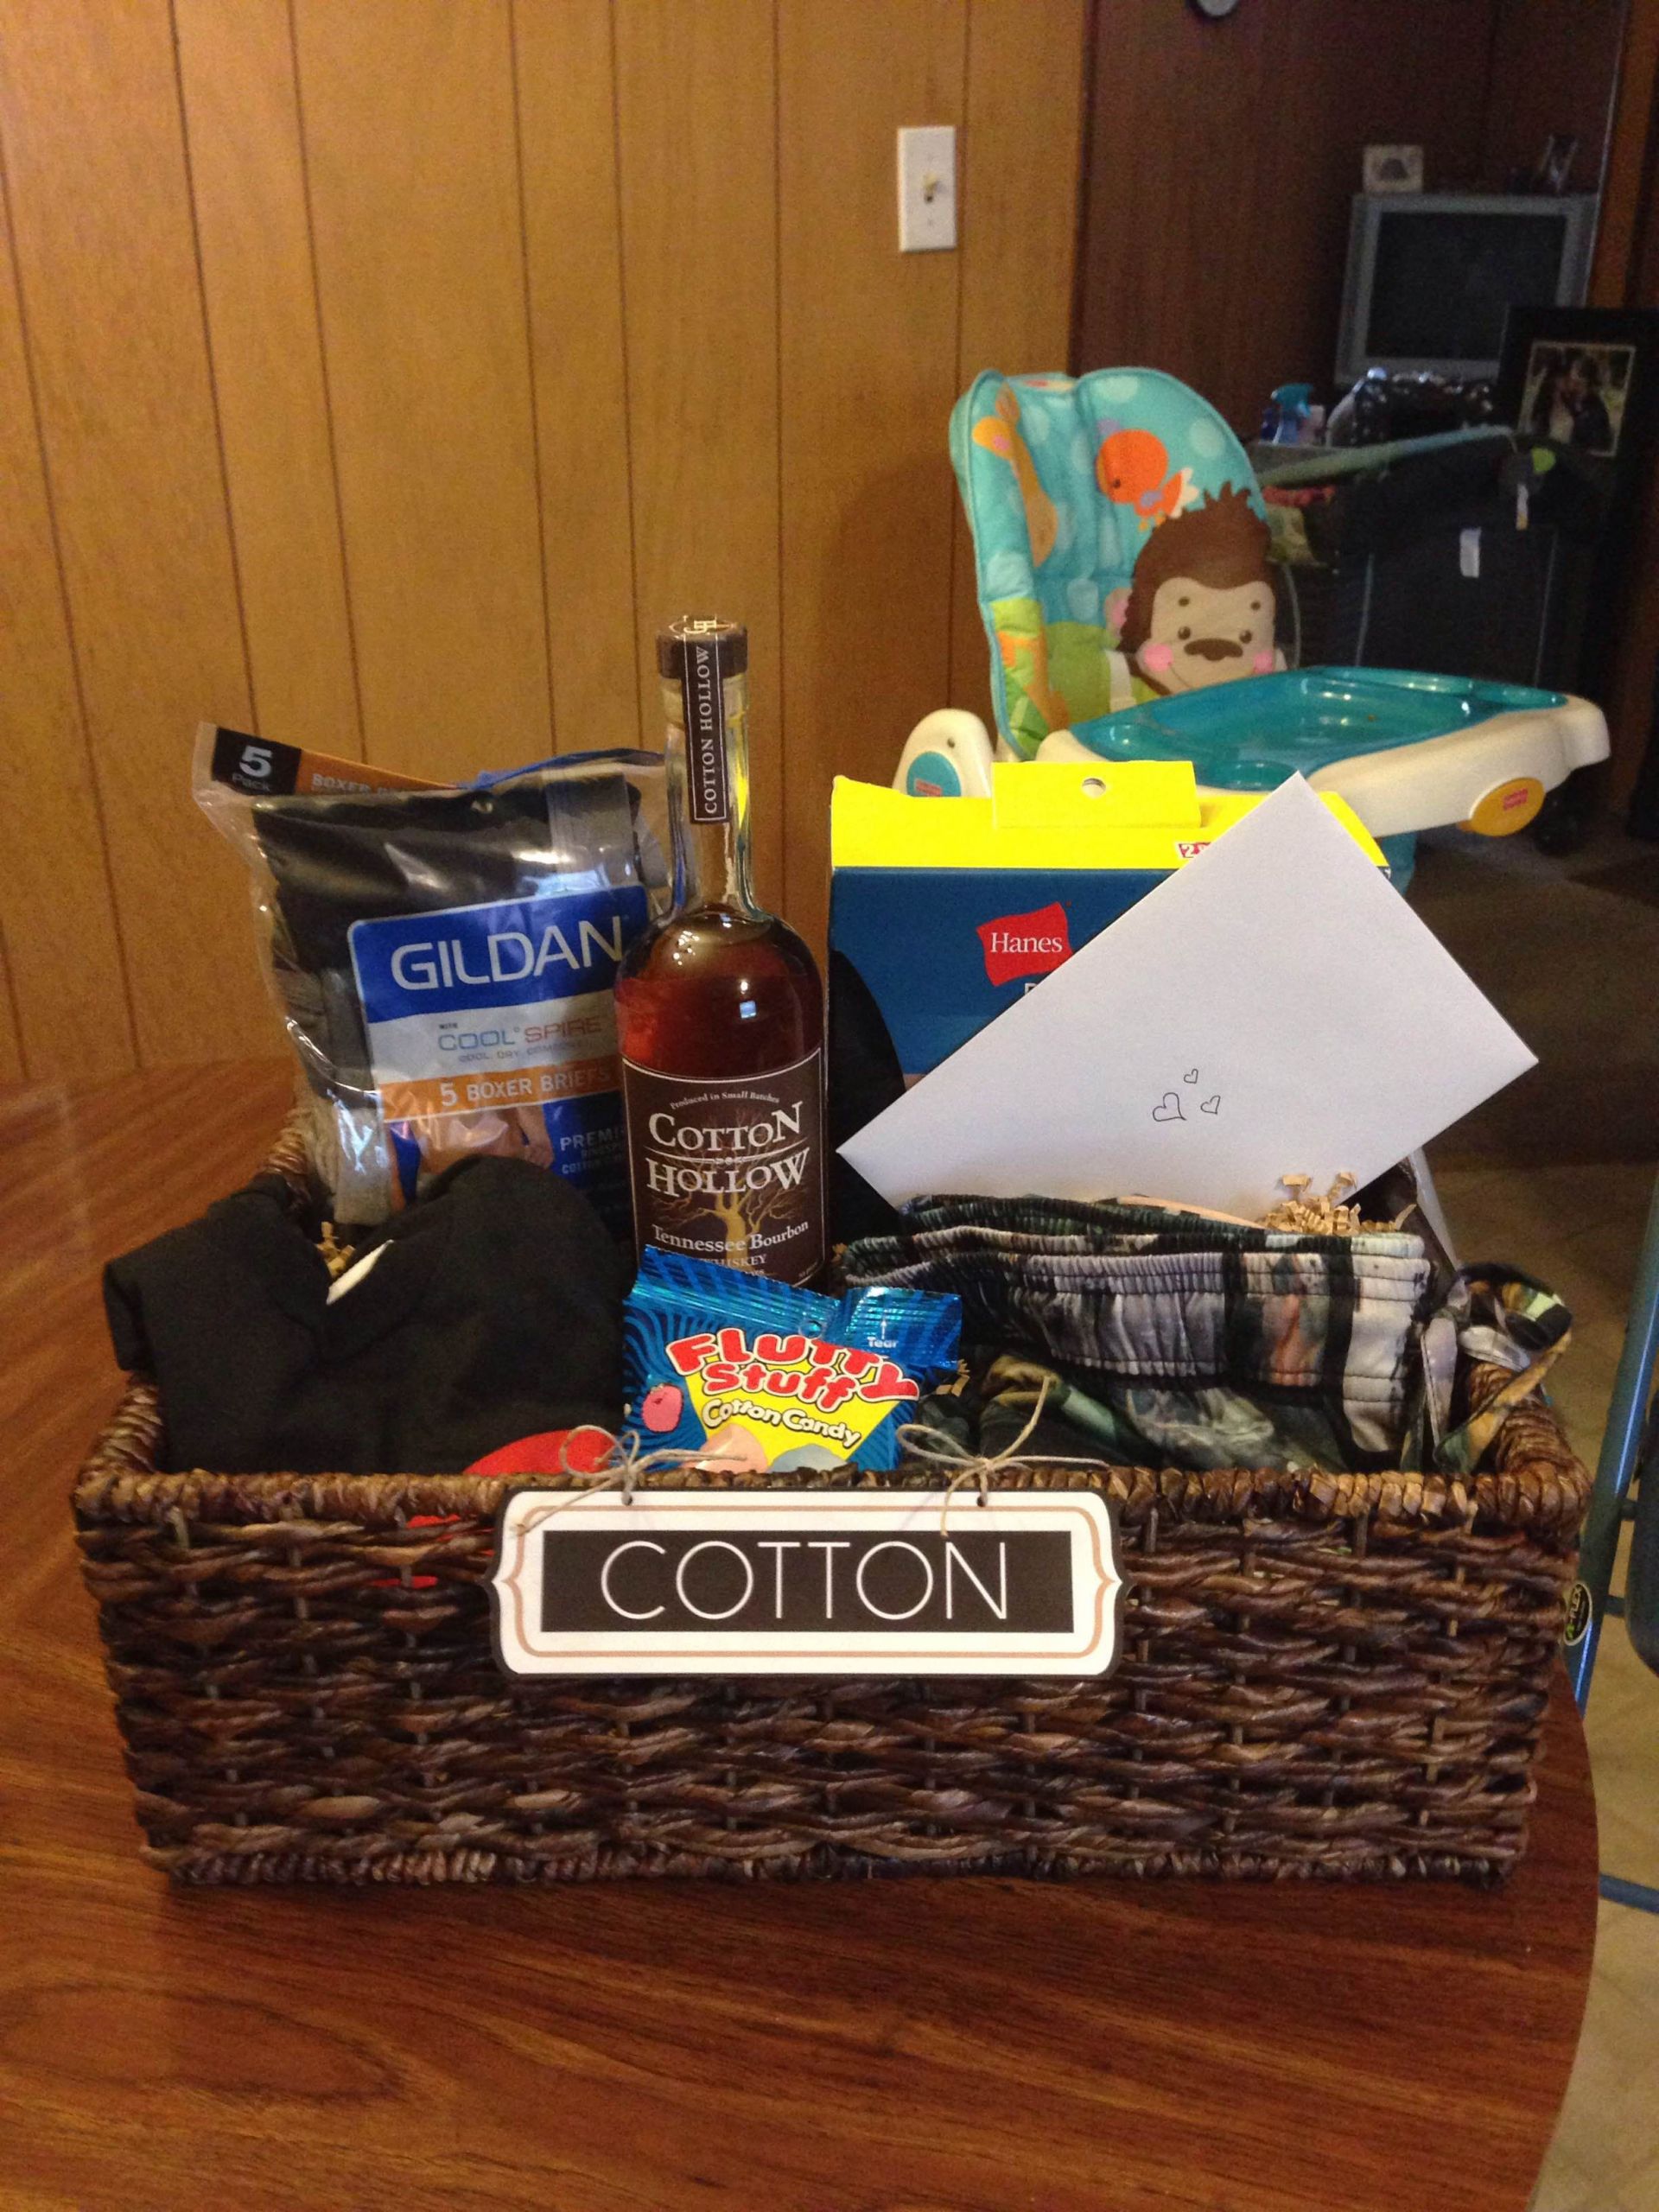 Second Wedding Anniversary Gift Ideas For Husband
 "Cotton" t basket I put to her for my husband for our